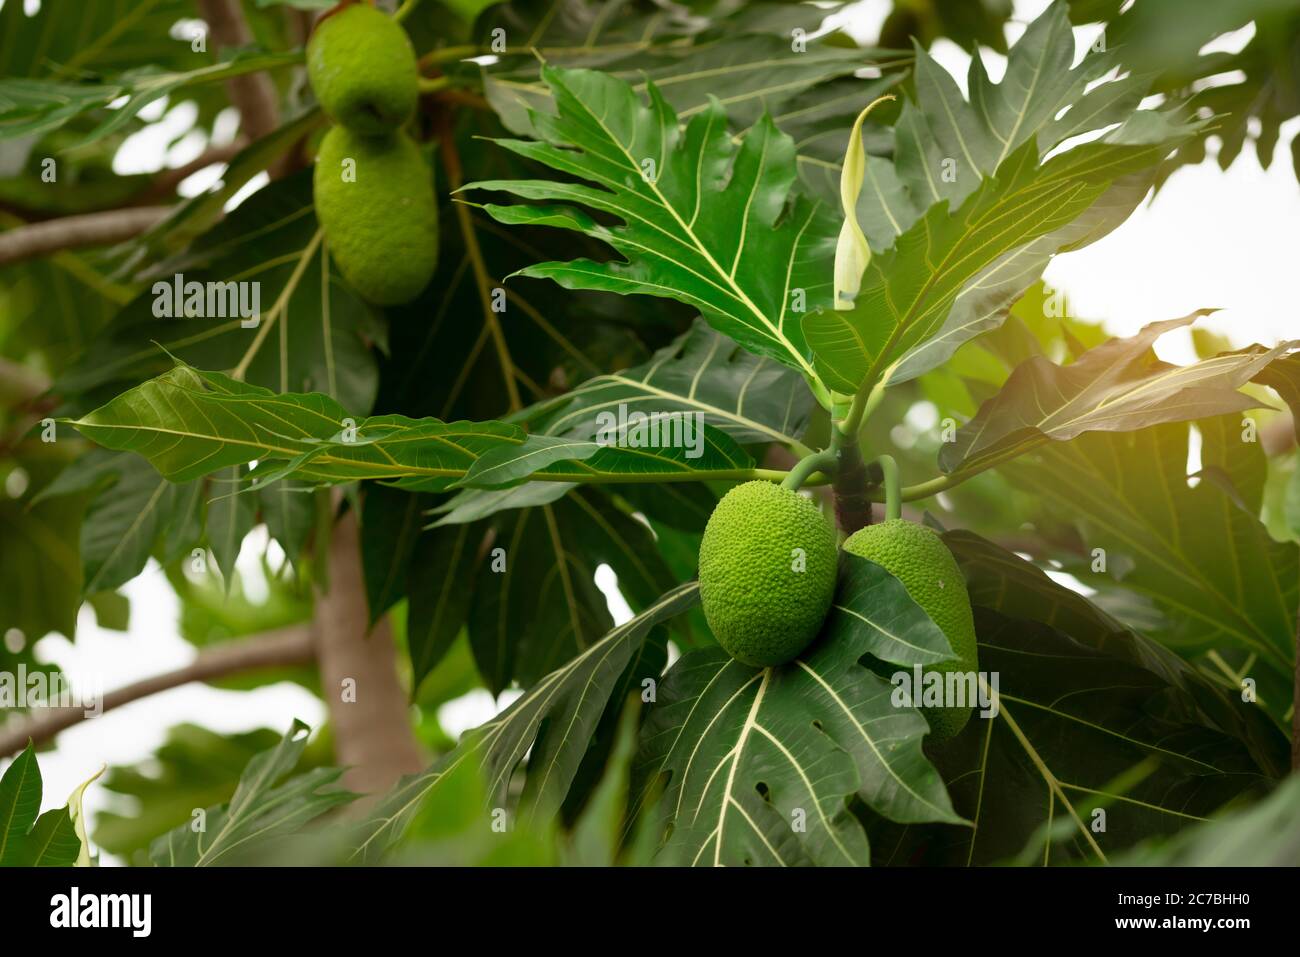 Breadfruit on breadfruit tree with green leaves in the garden. Tropical tree with thick leaves are deeply cut. Flowering tree. Staple food. Plant give Stock Photo